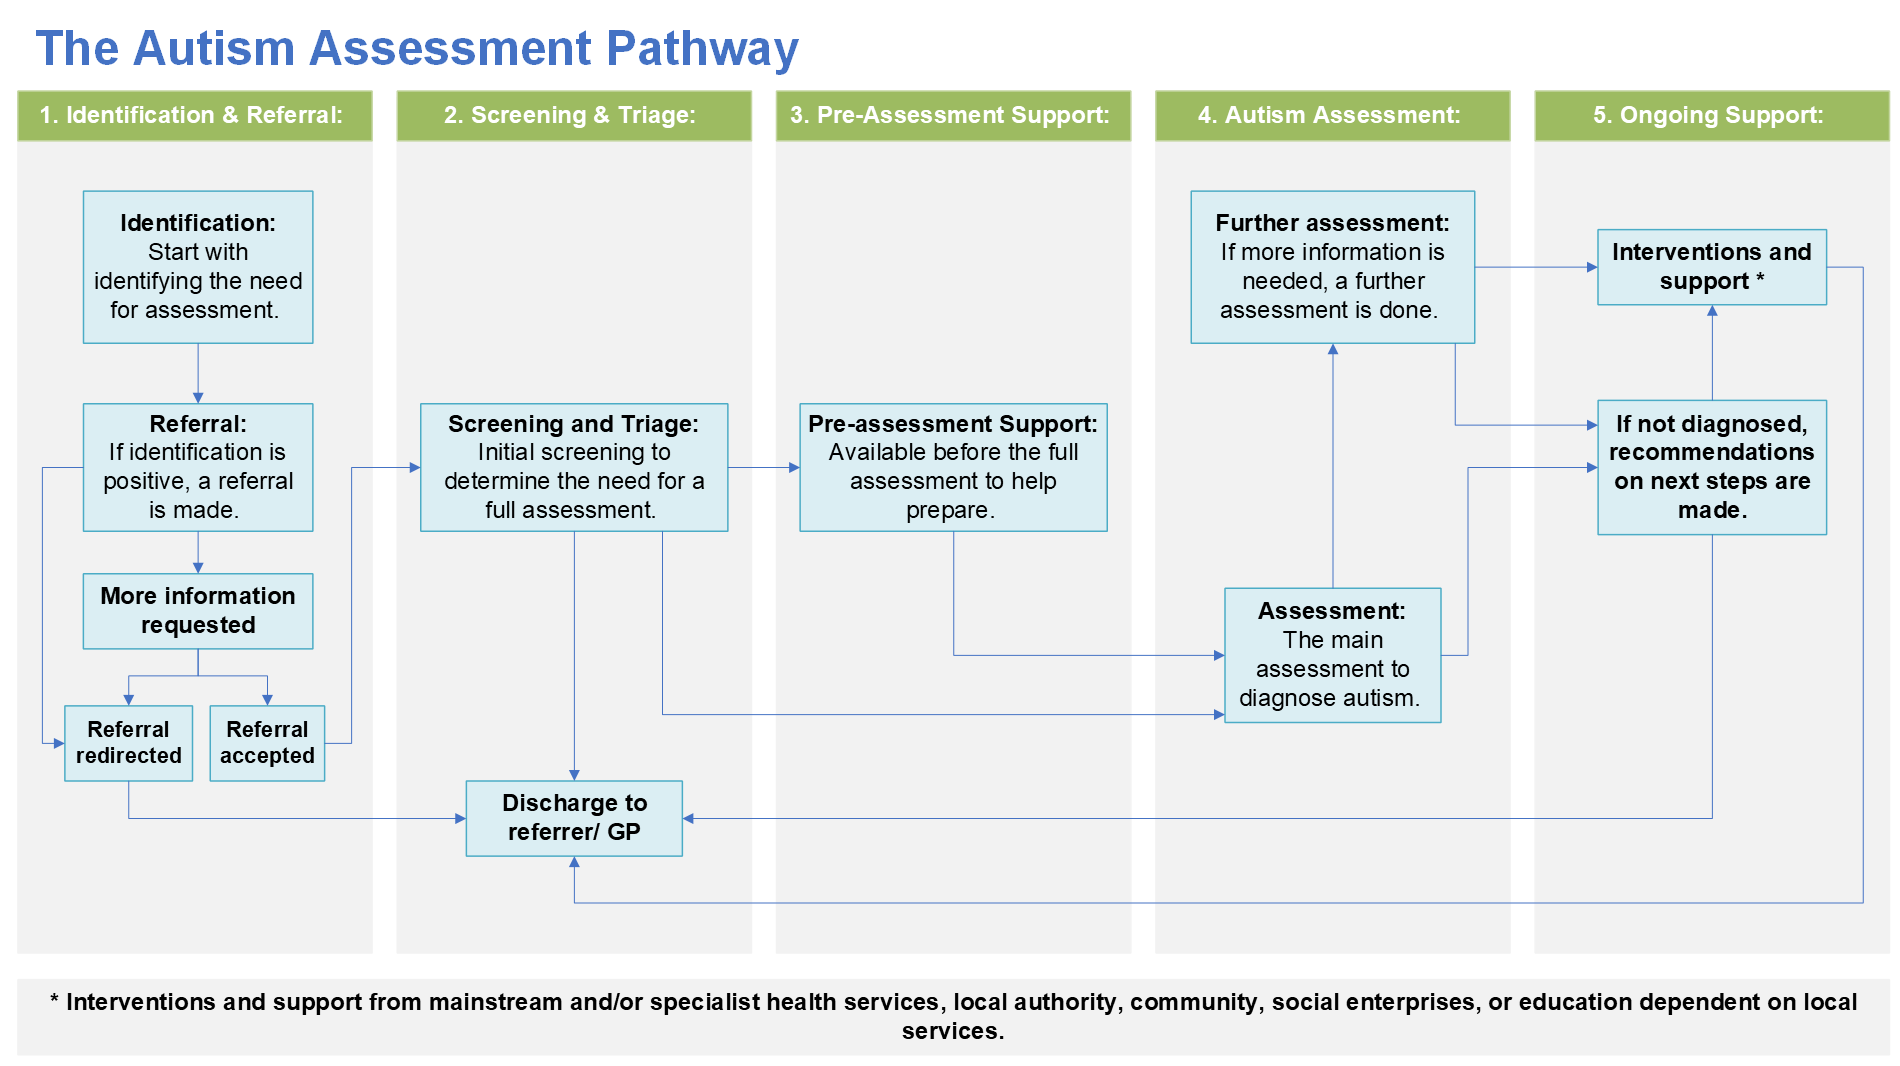 Flowchart of the Autism Assessment Pathway from referral to support.